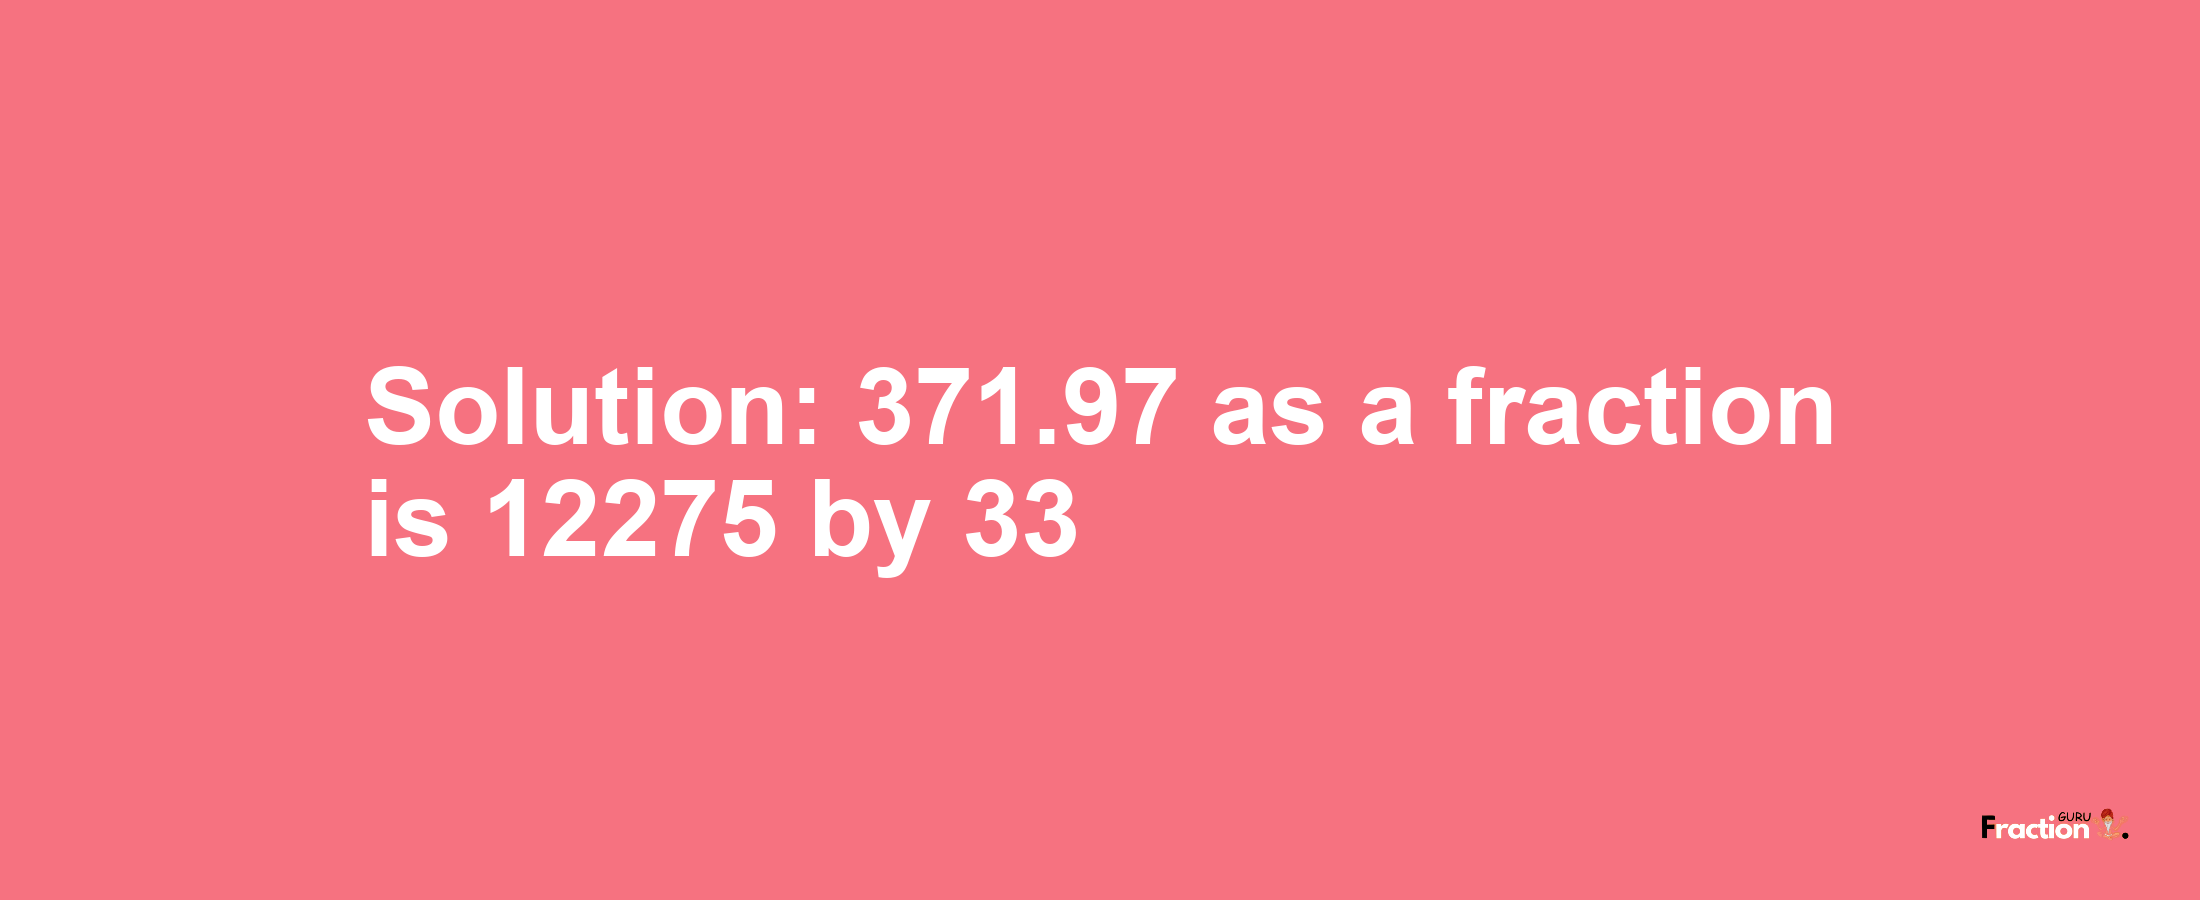 Solution:371.97 as a fraction is 12275/33